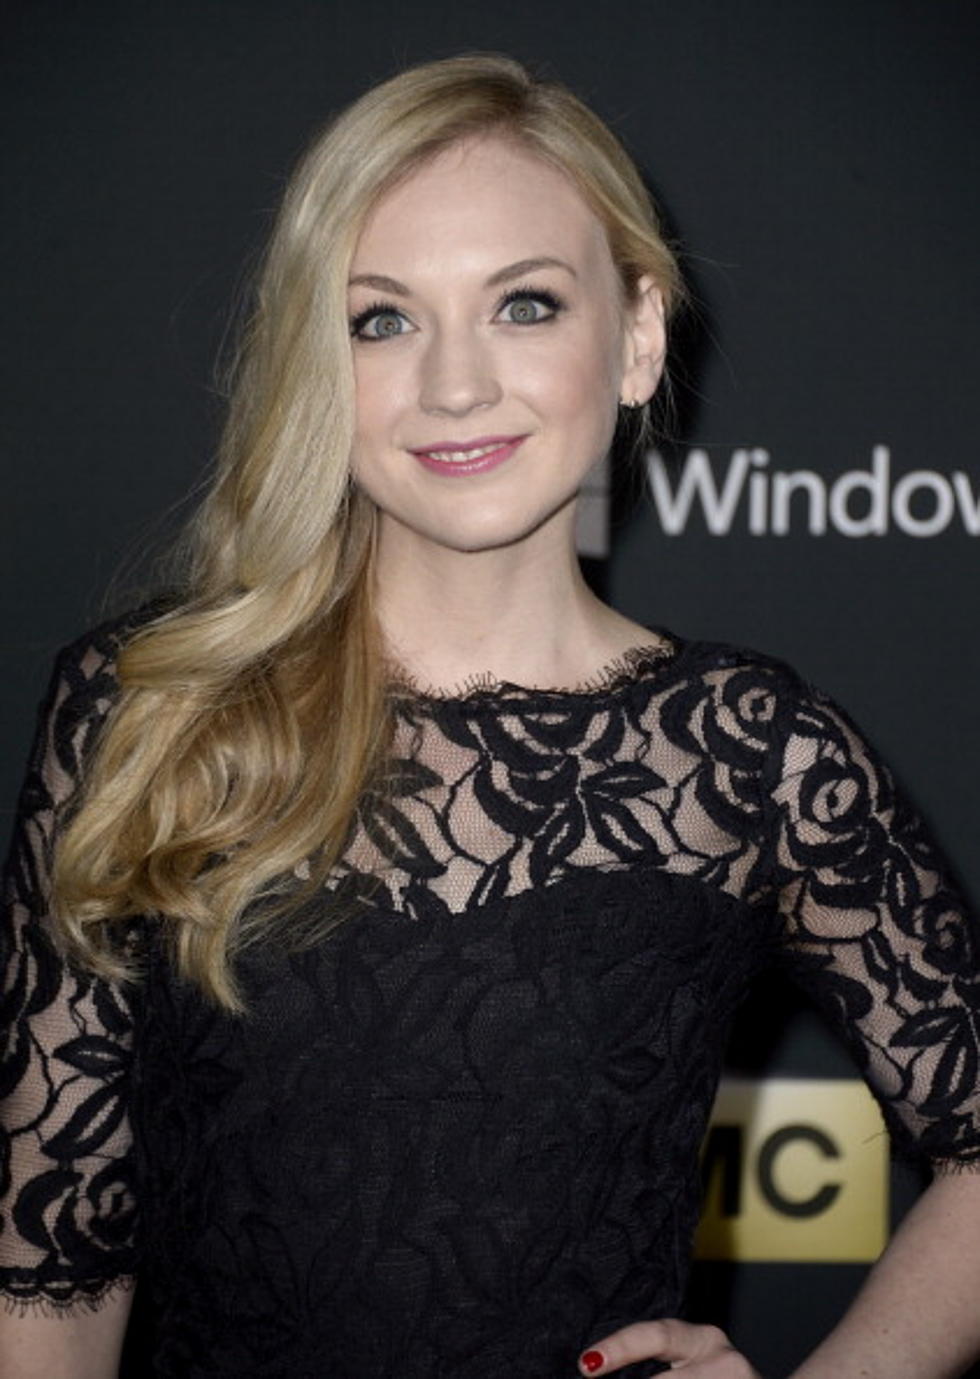 ‘The Walking Dead’ has a Midwest Connection in Emily Kinney